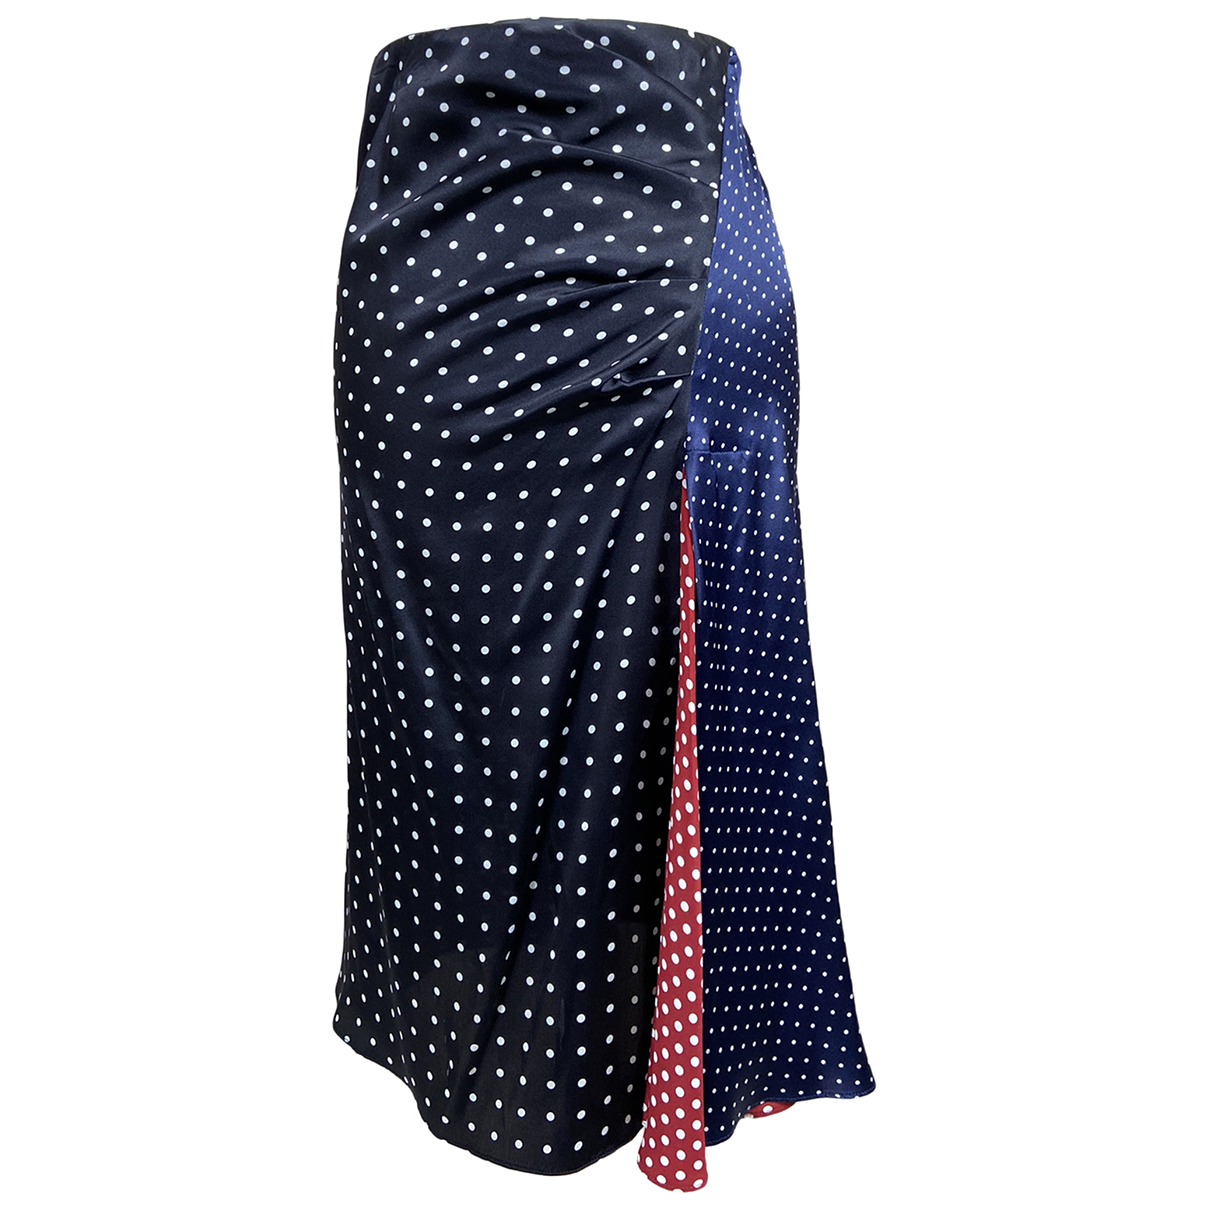 Silk OFFicial mid-length skirt Now free shipping